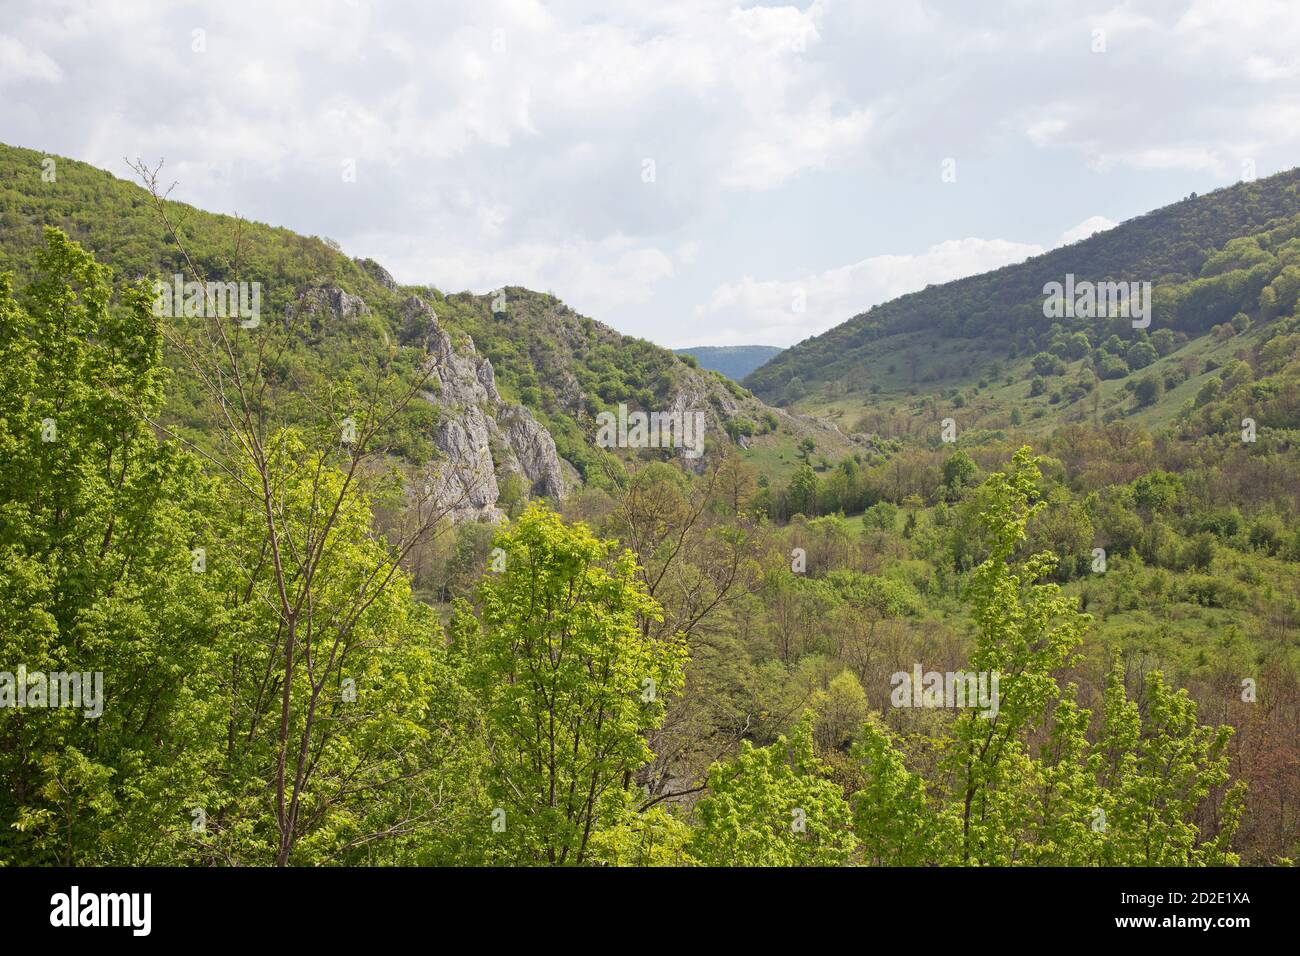 The Nera Gorge-Beușnița National Park is a protected area situated in Romania, Caraş-Severin County.View of the rocky mountain, the forest in spring. Stock Photo